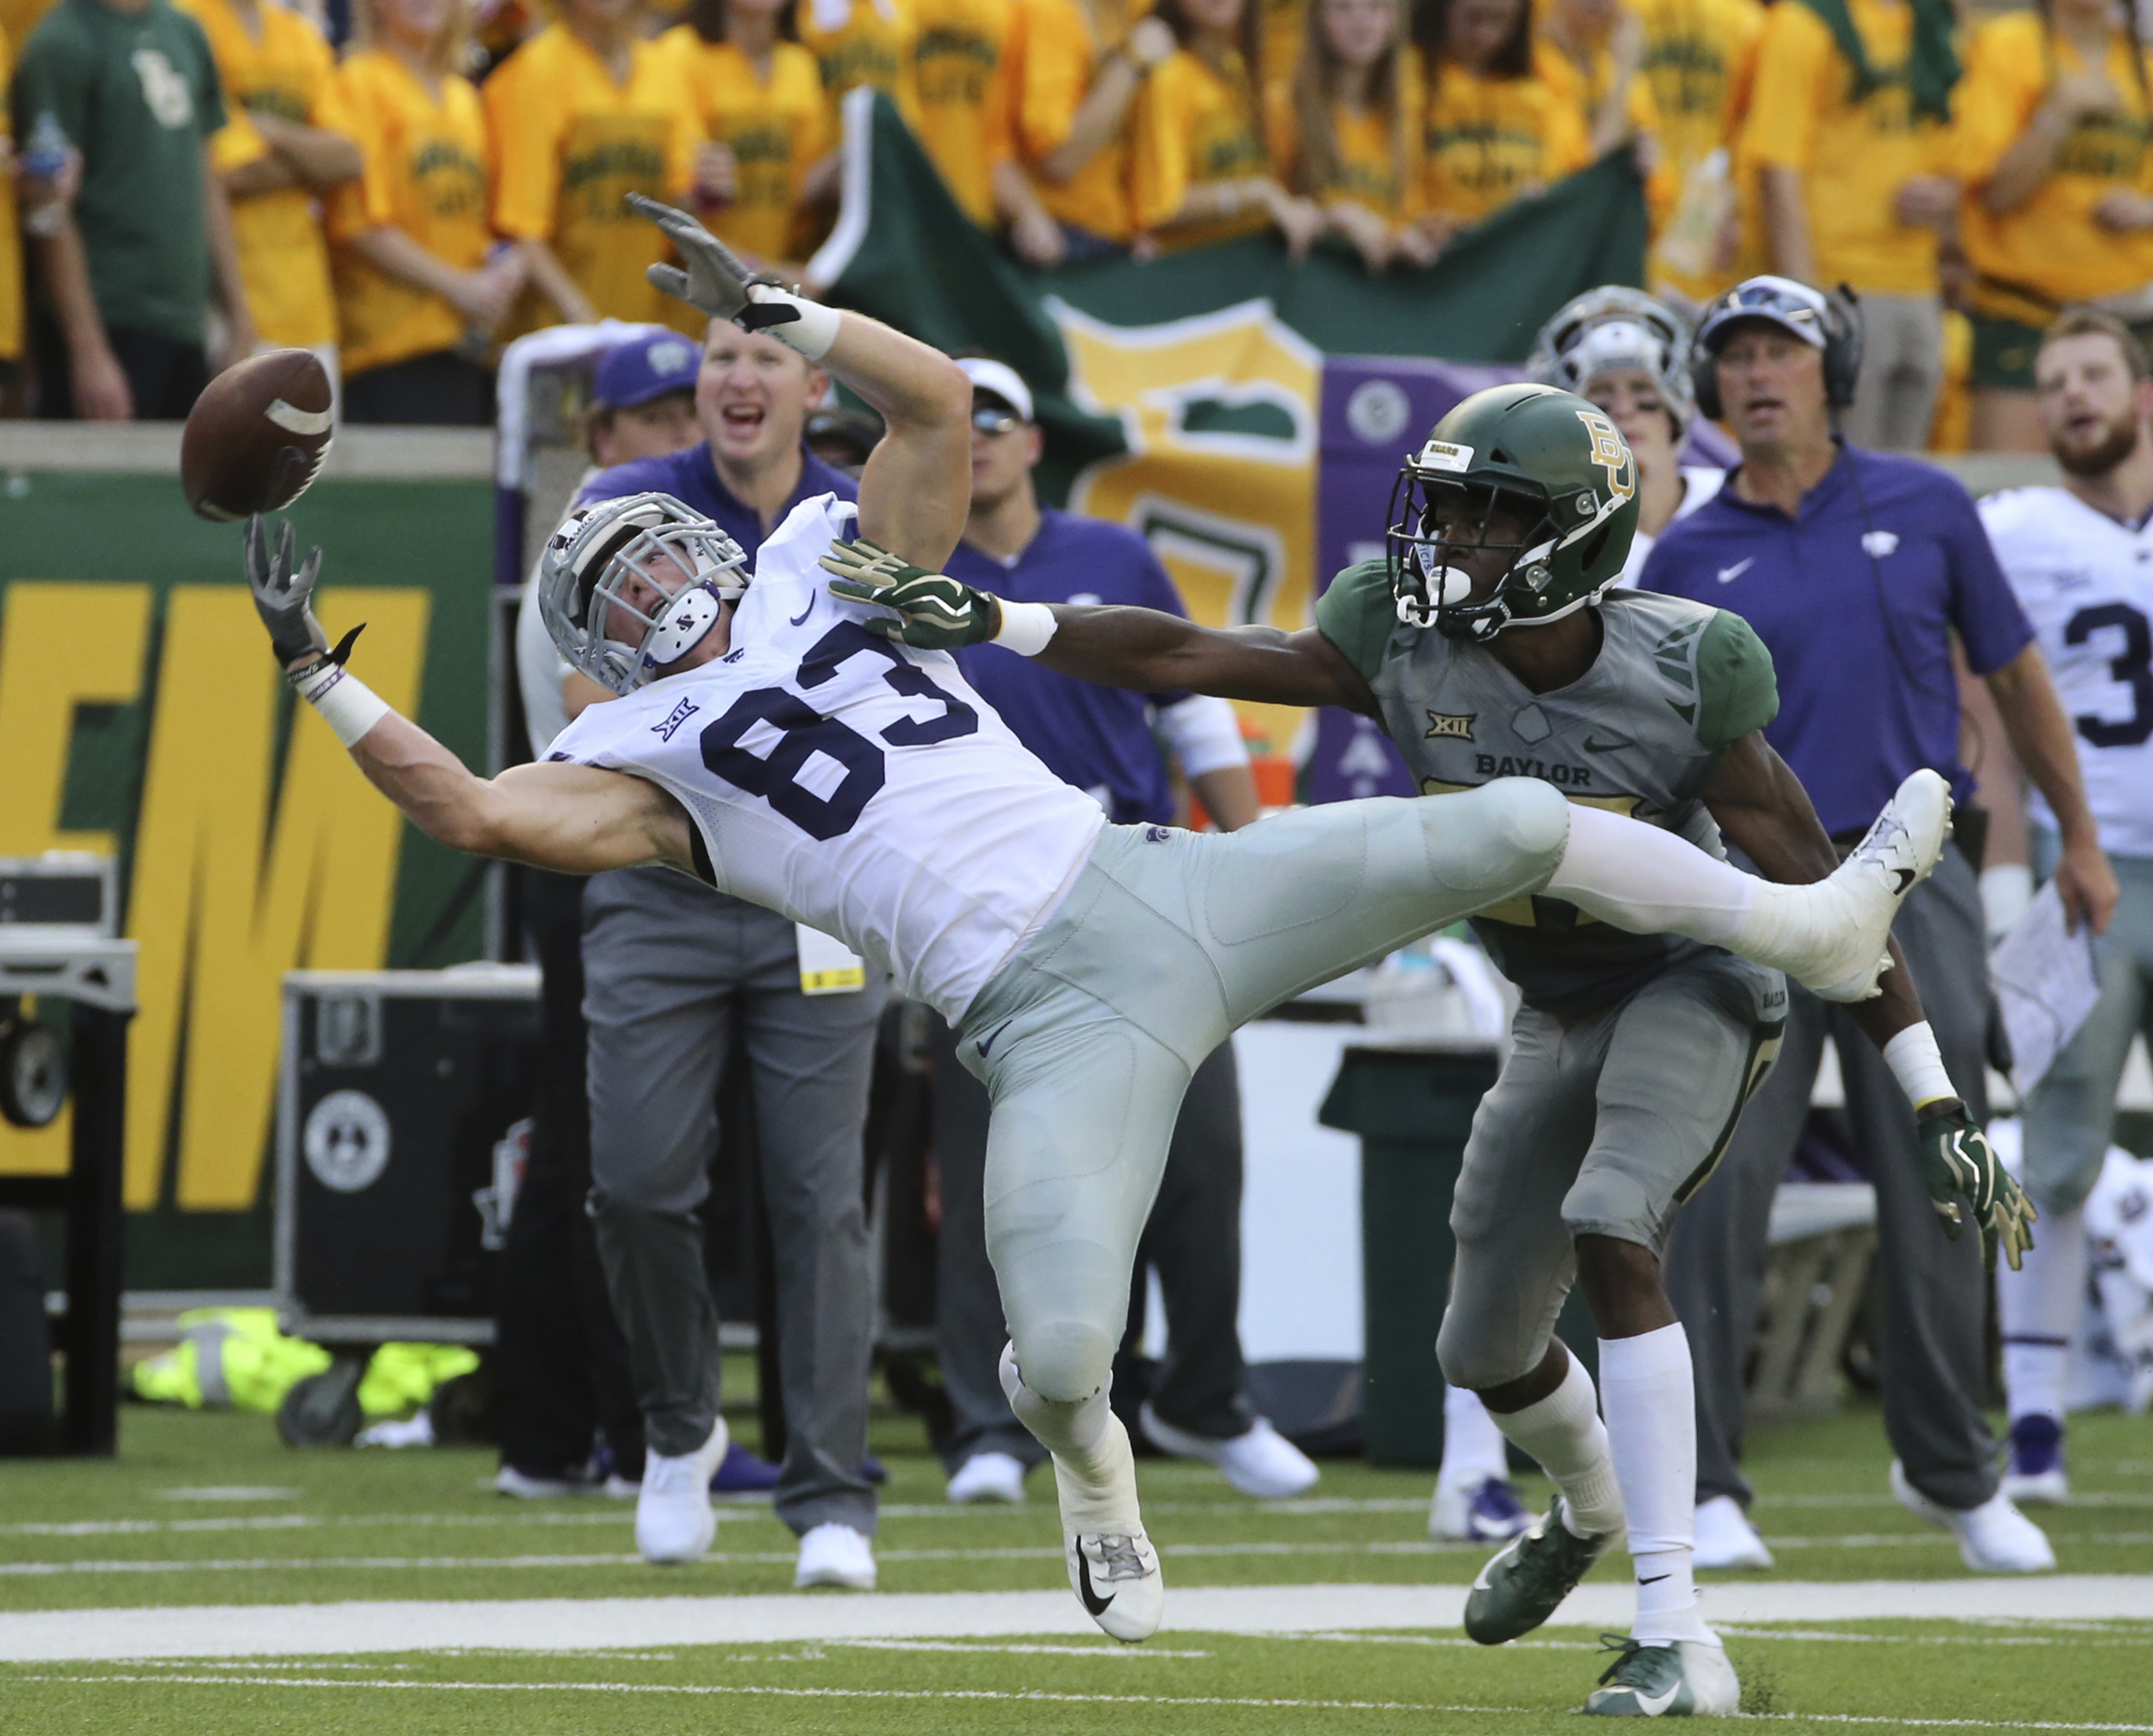 Baylor beats K-State on Martin’s FG with 8 seconds left